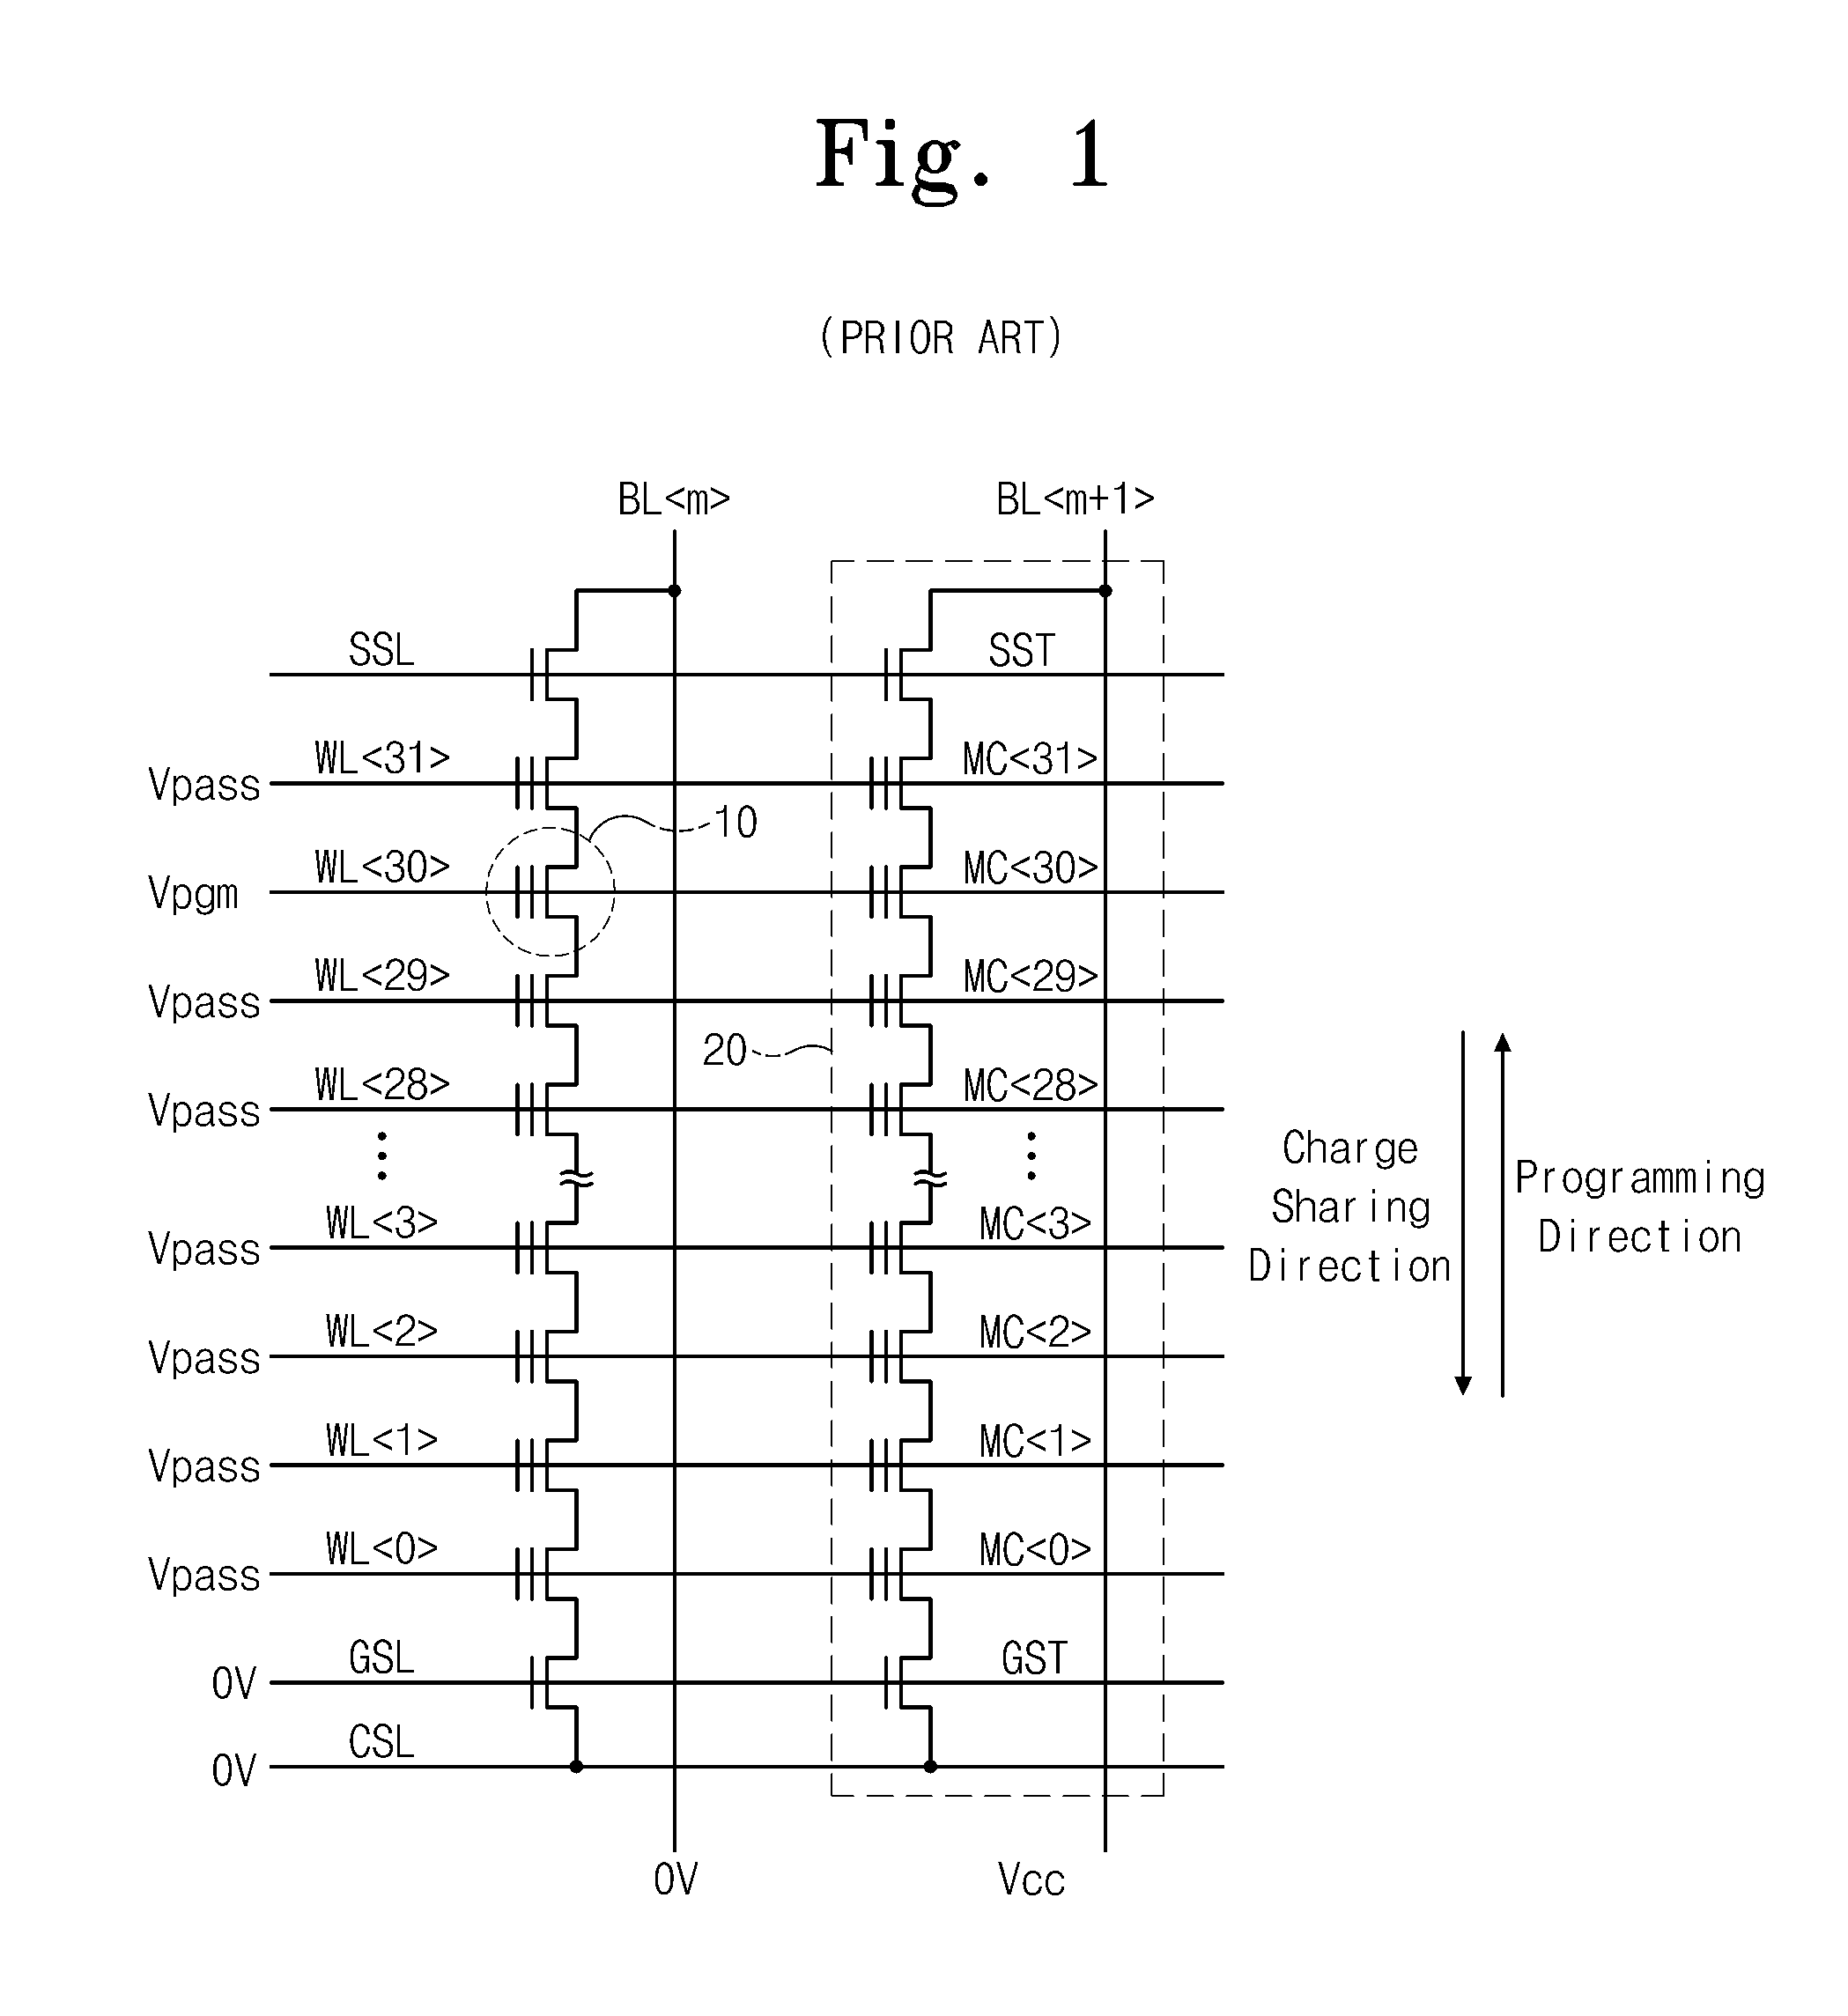 Flash memory device including a dummy cell